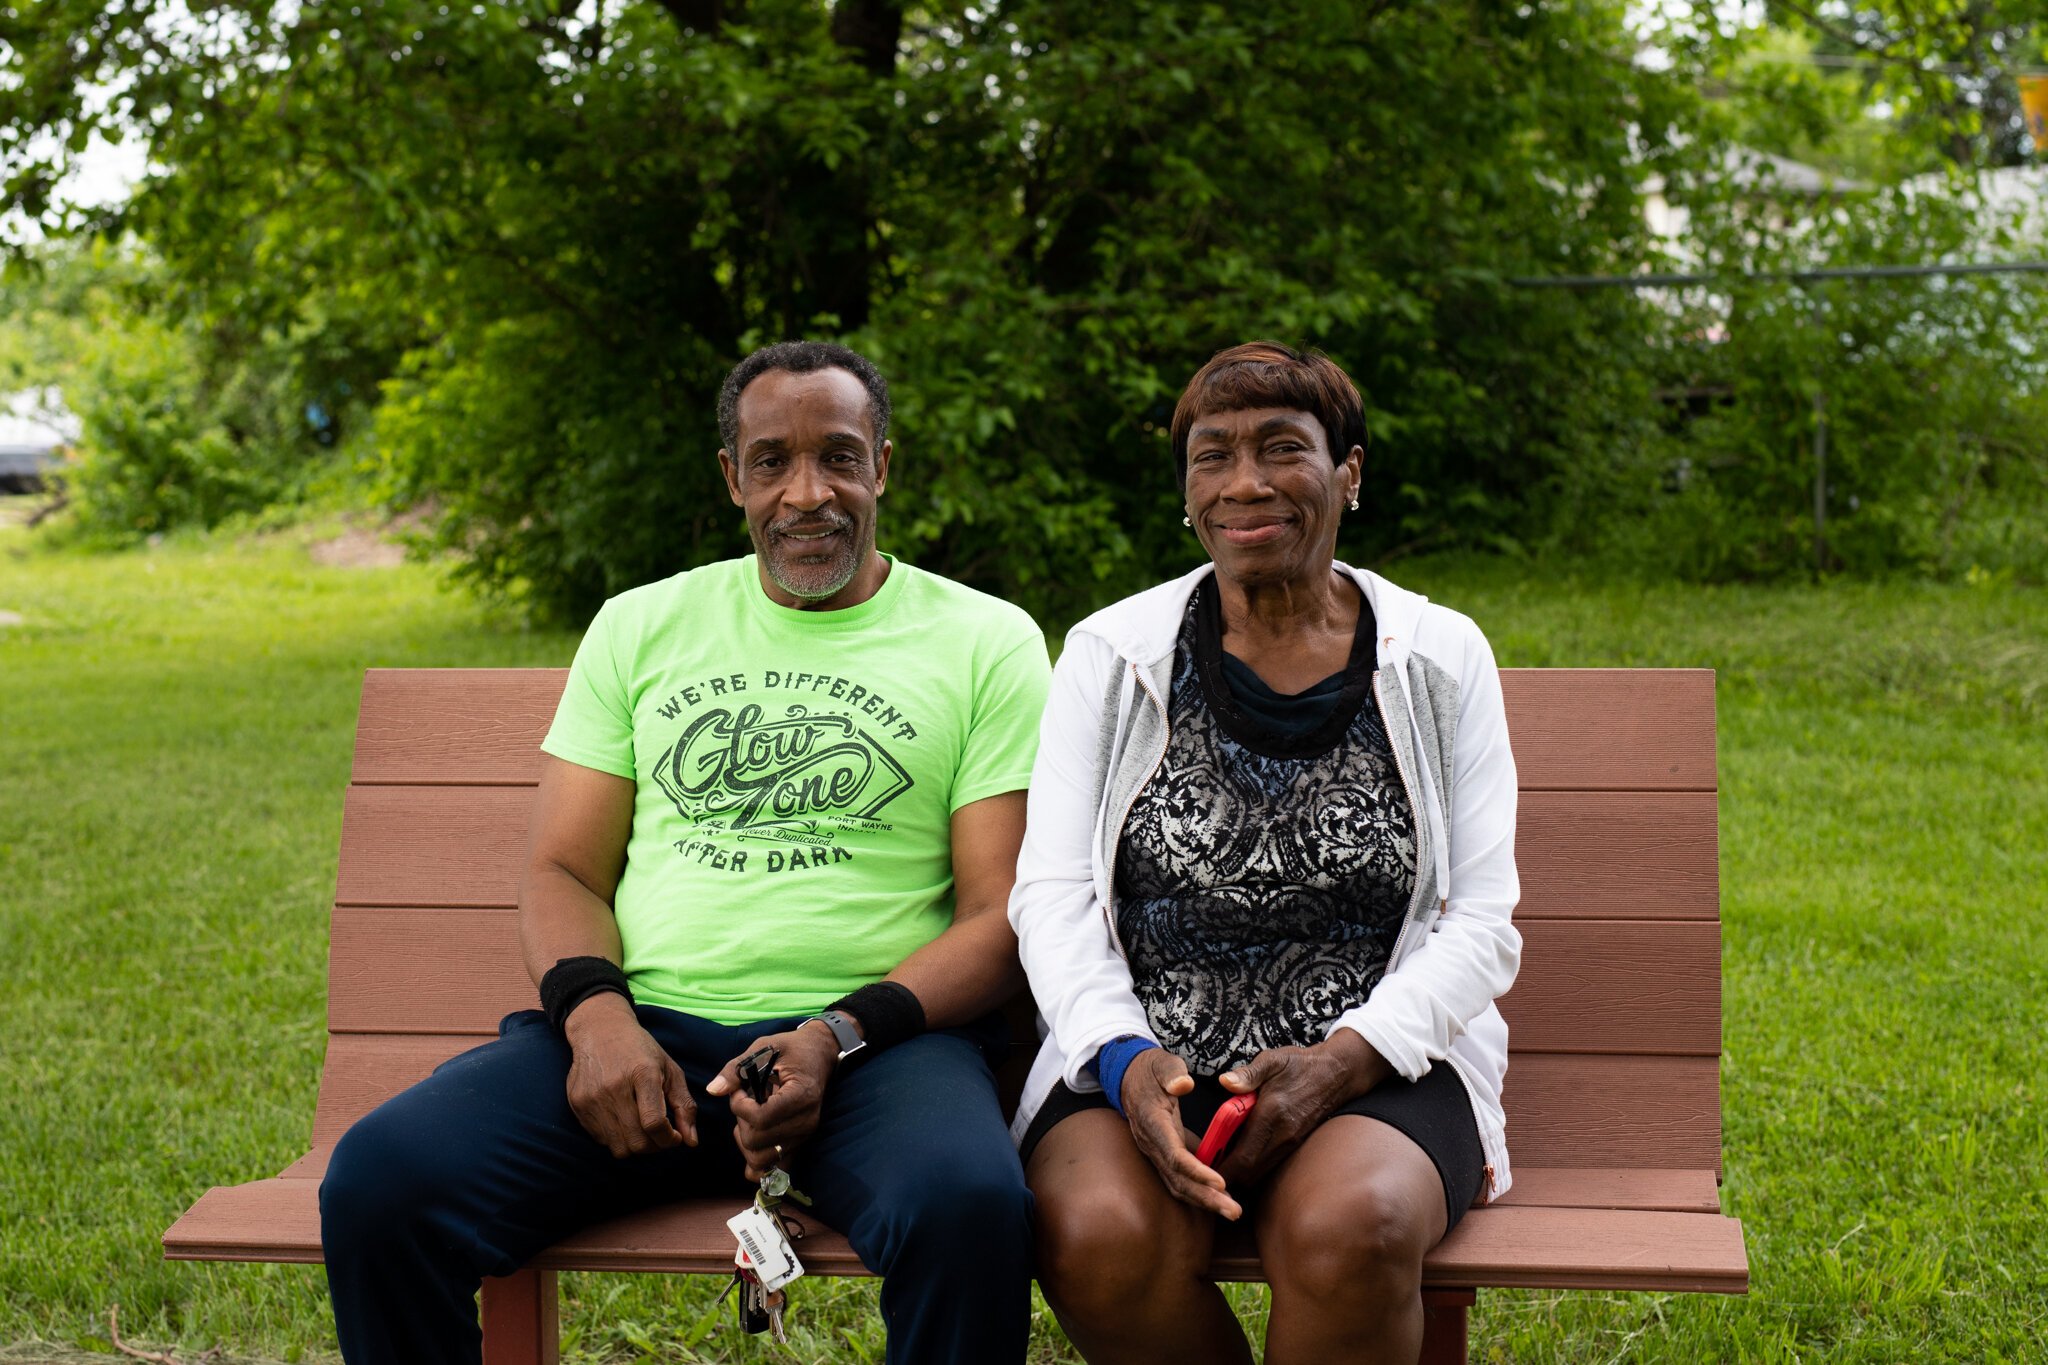 Renaissance Pointe residents Lester and Hester Powell have taken it upon themselves to care for a local park.